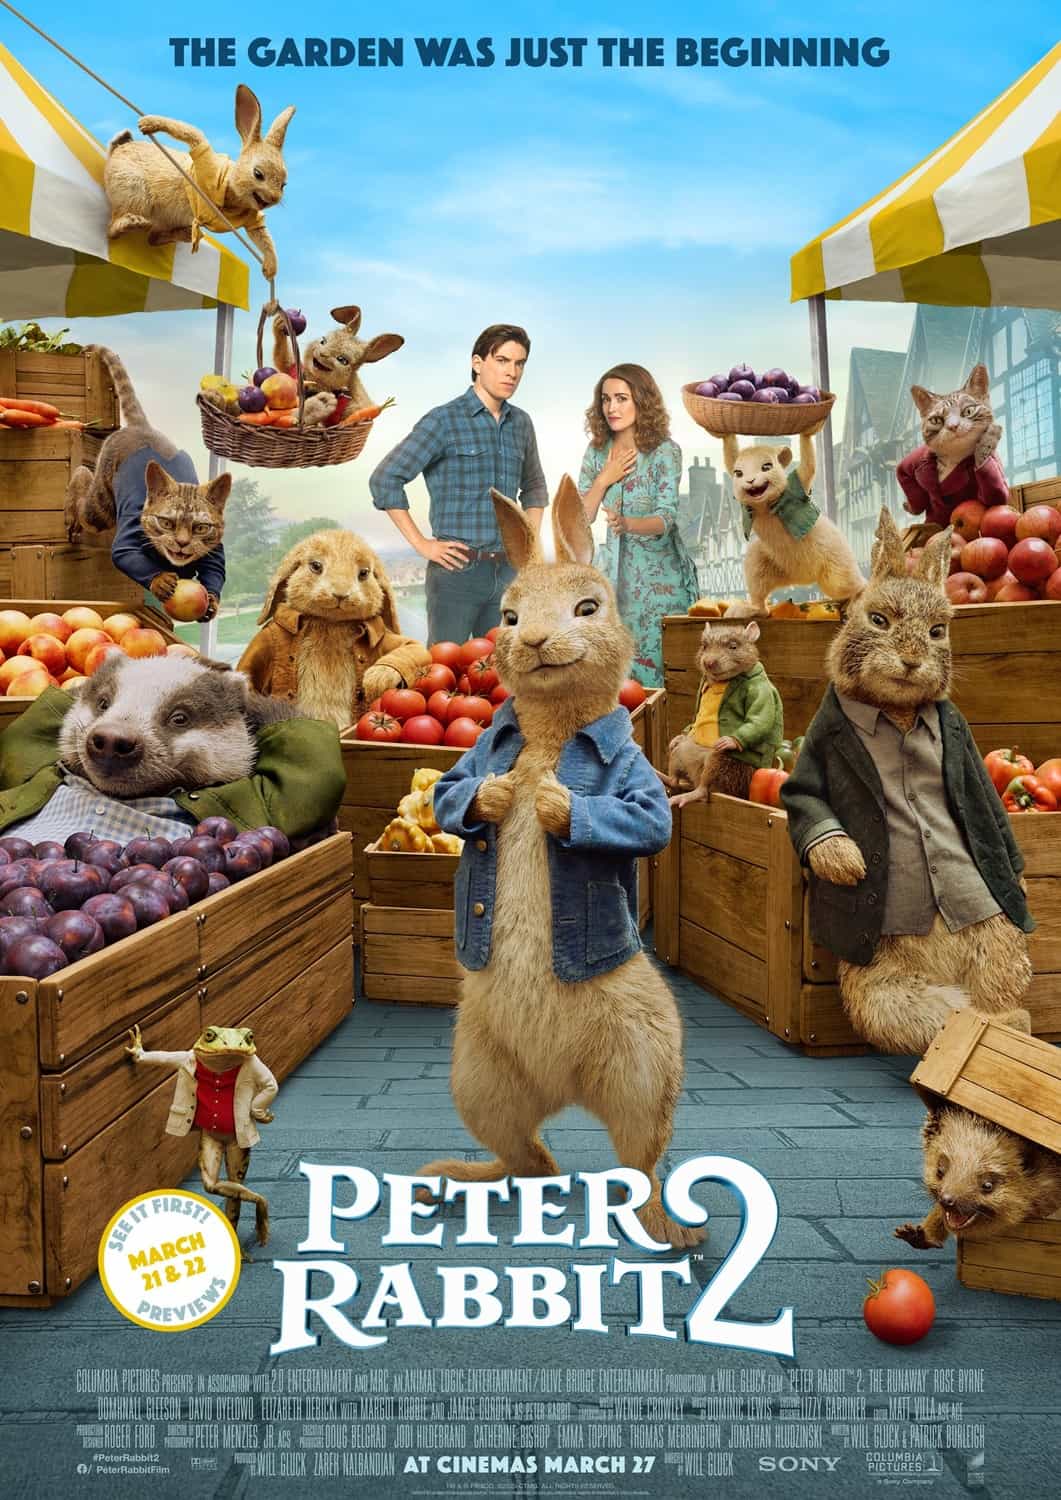 New trailer for Peter Rabbit 2: The Runaway